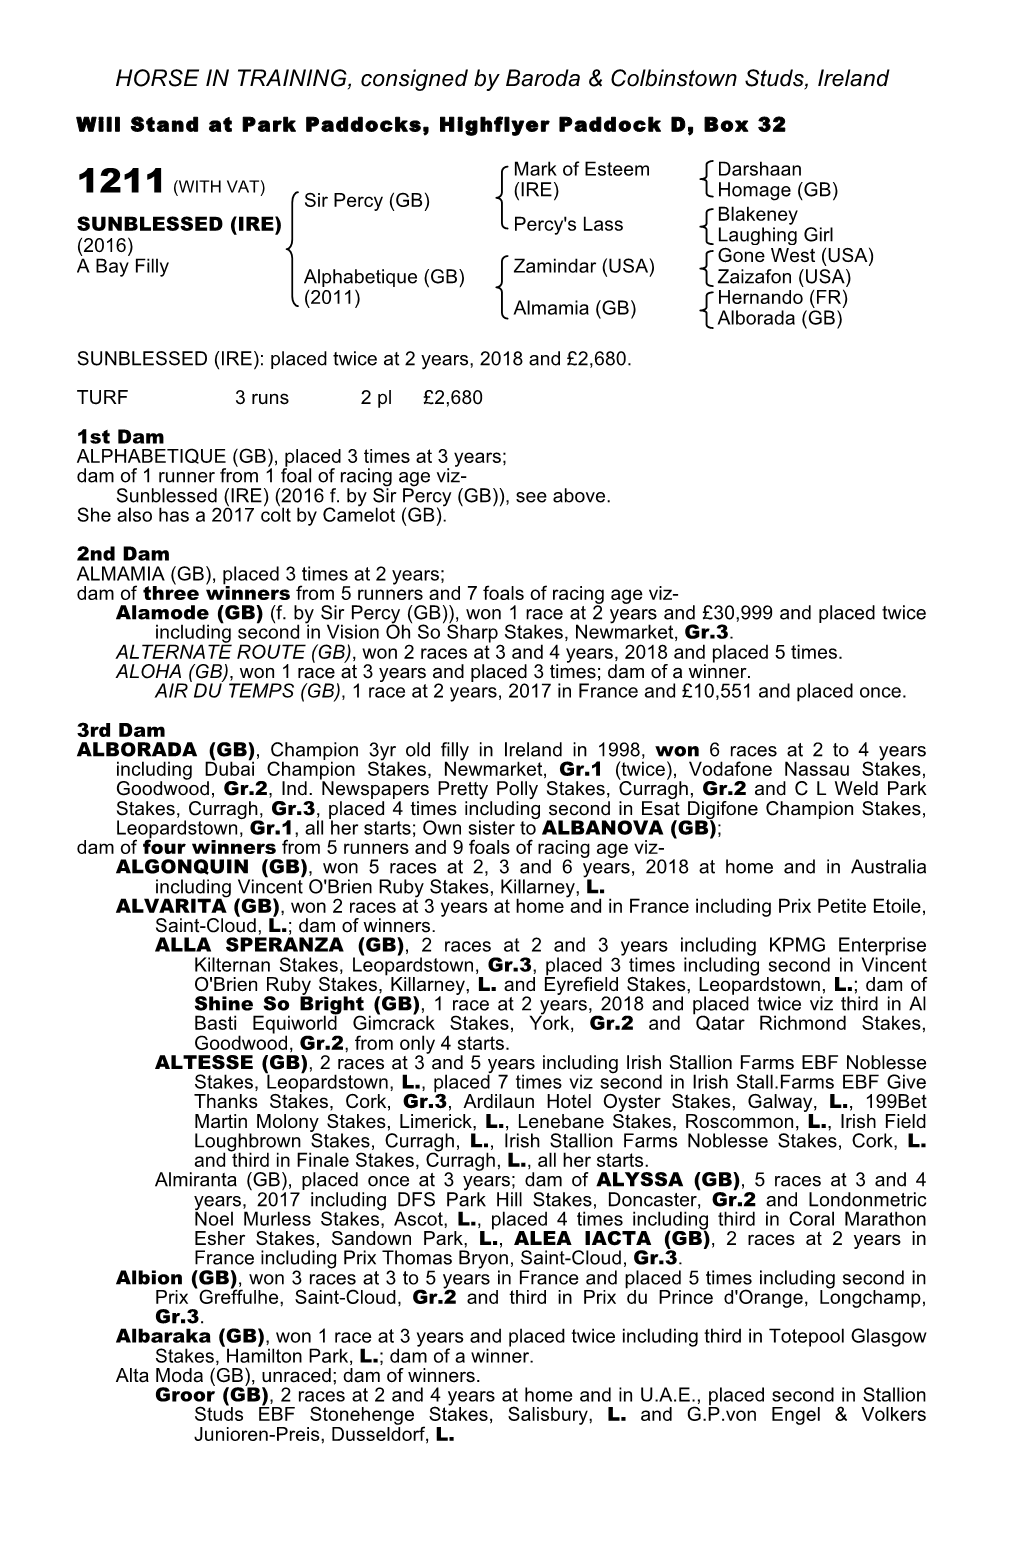 HORSE in TRAINING, Consigned by Baroda & Colbinstown Studs, Ireland